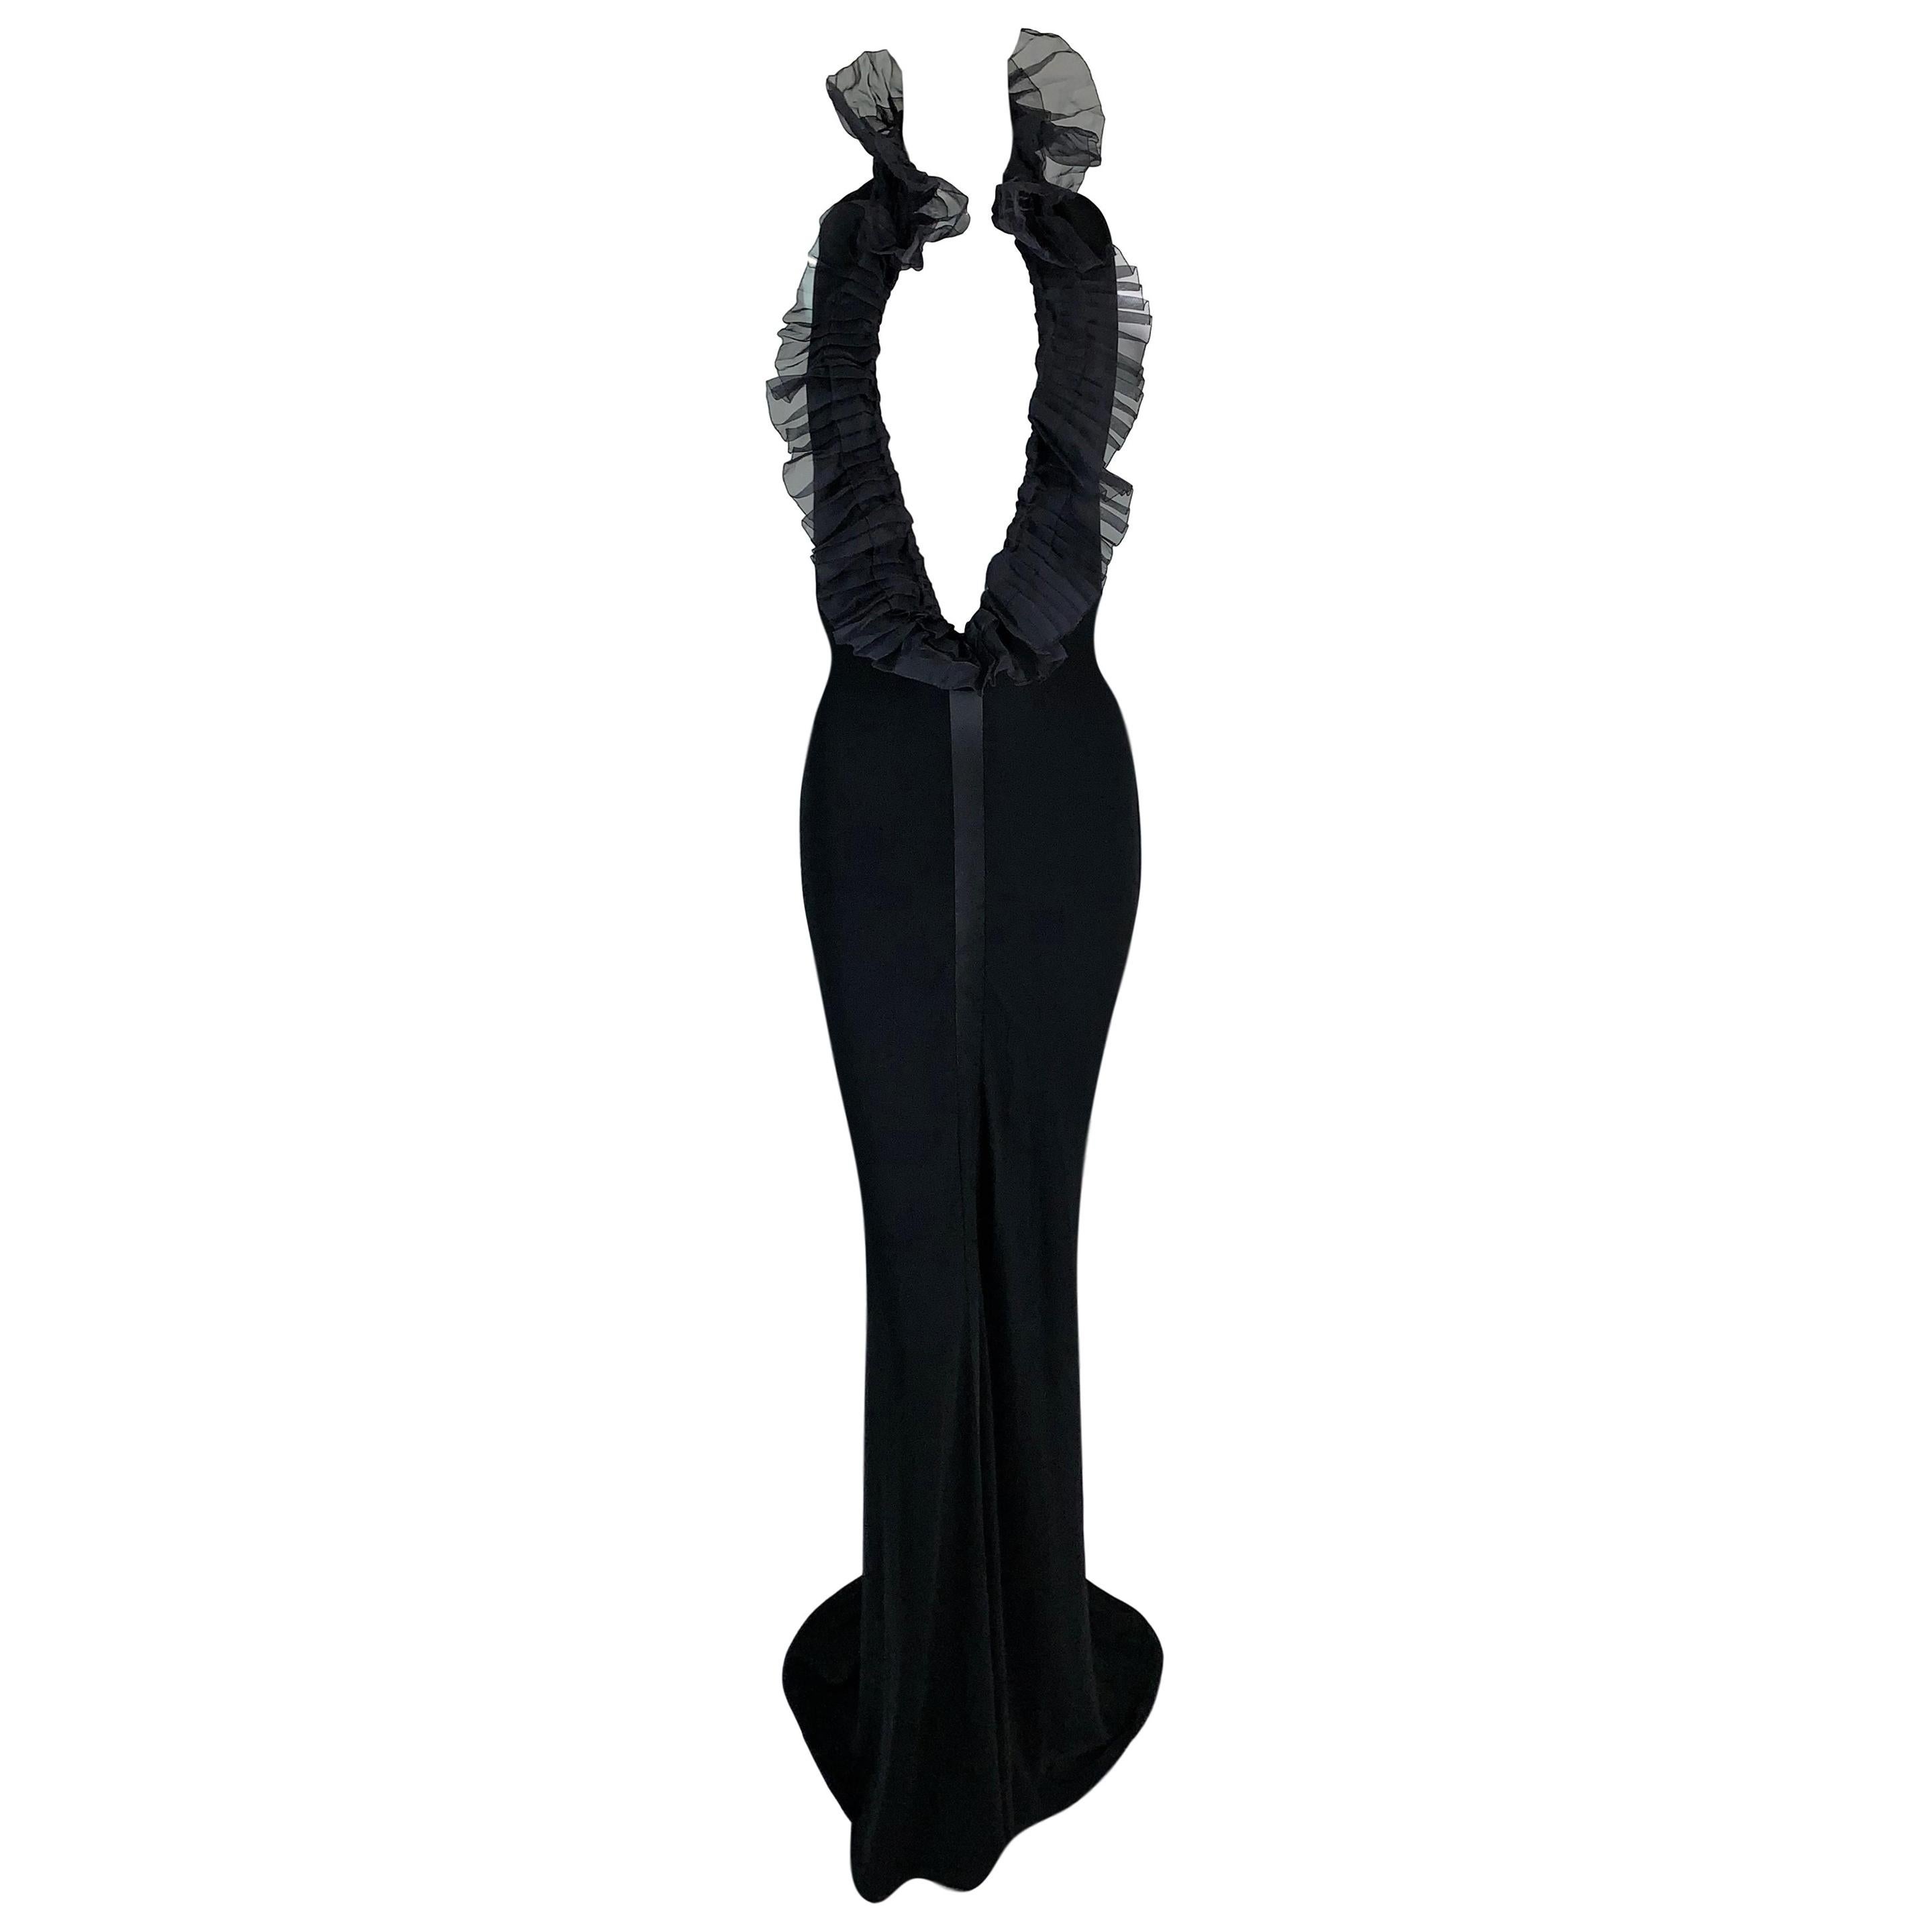 NWT F/W 2004 Gianfranco Ferre Plunging Black Bodycon Long Dress Gown For Sale